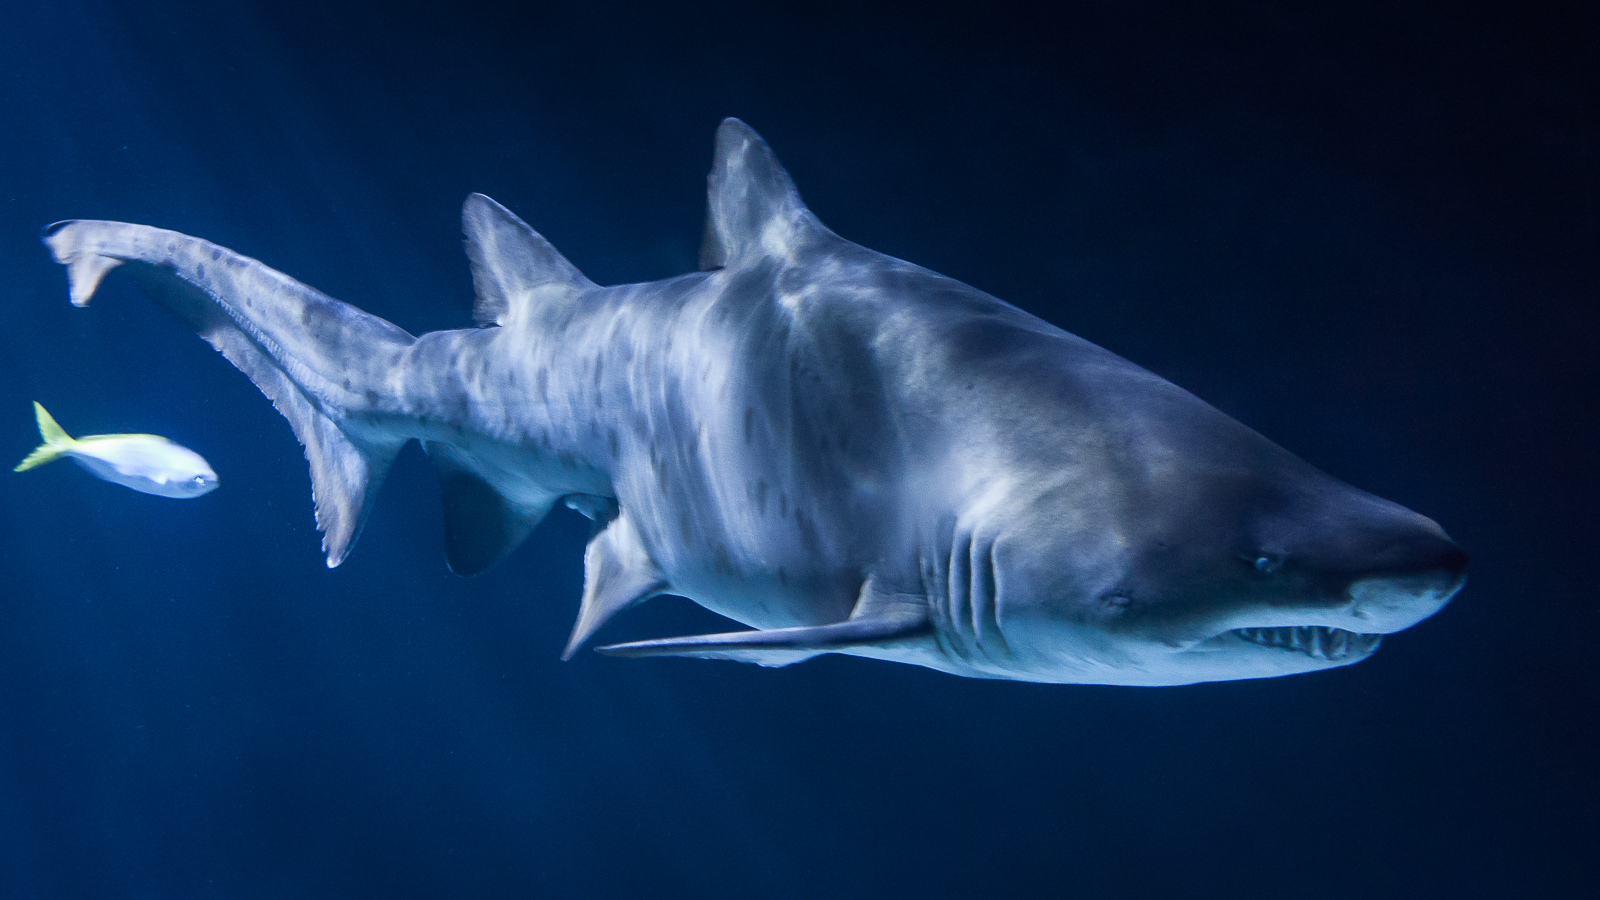 Why Sharks Should be Afraid of Humans